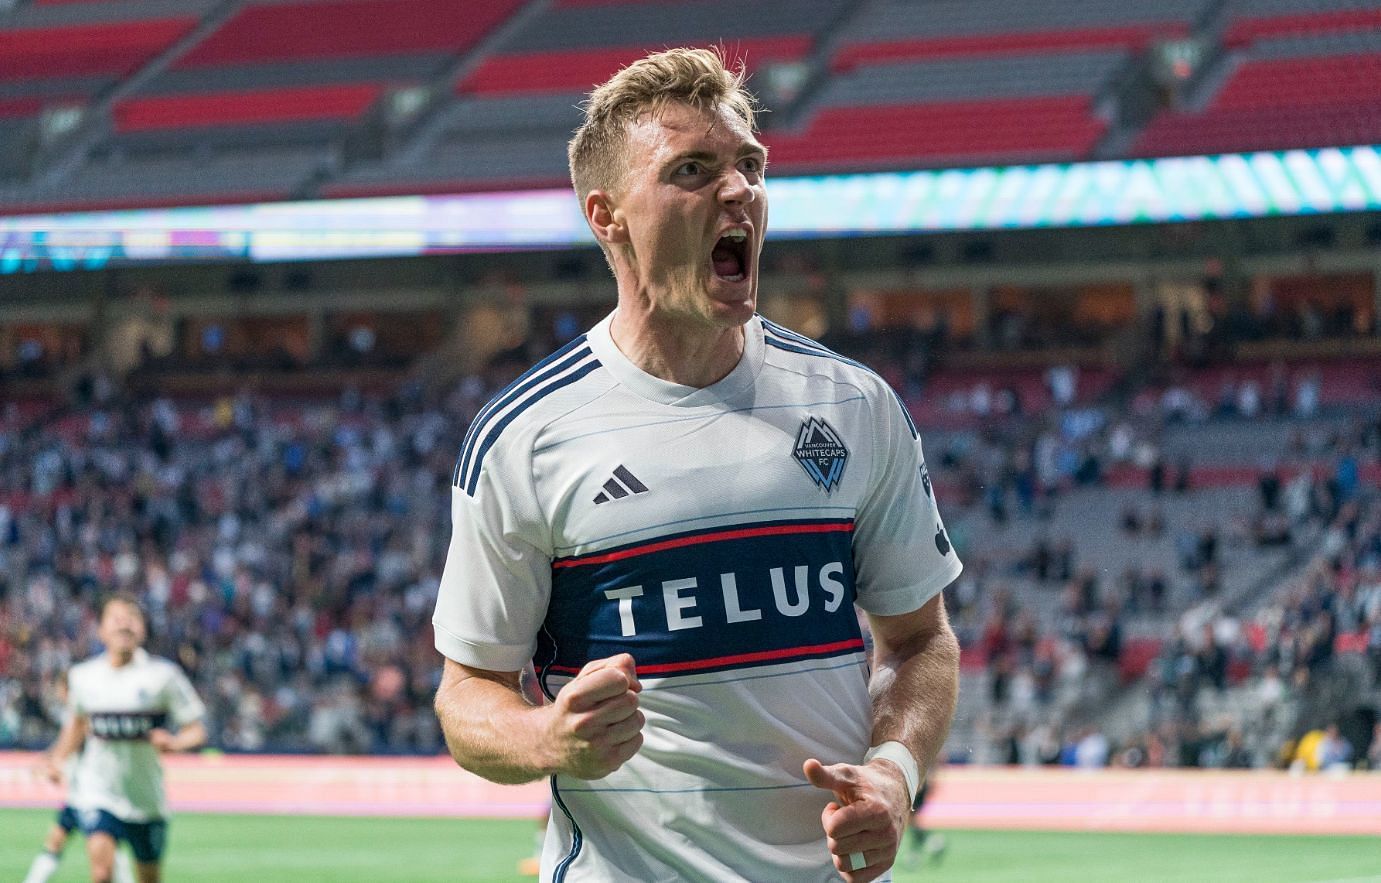 Julian Gressel of Vancouver Whitecaps (cred: The Globe and Mail)